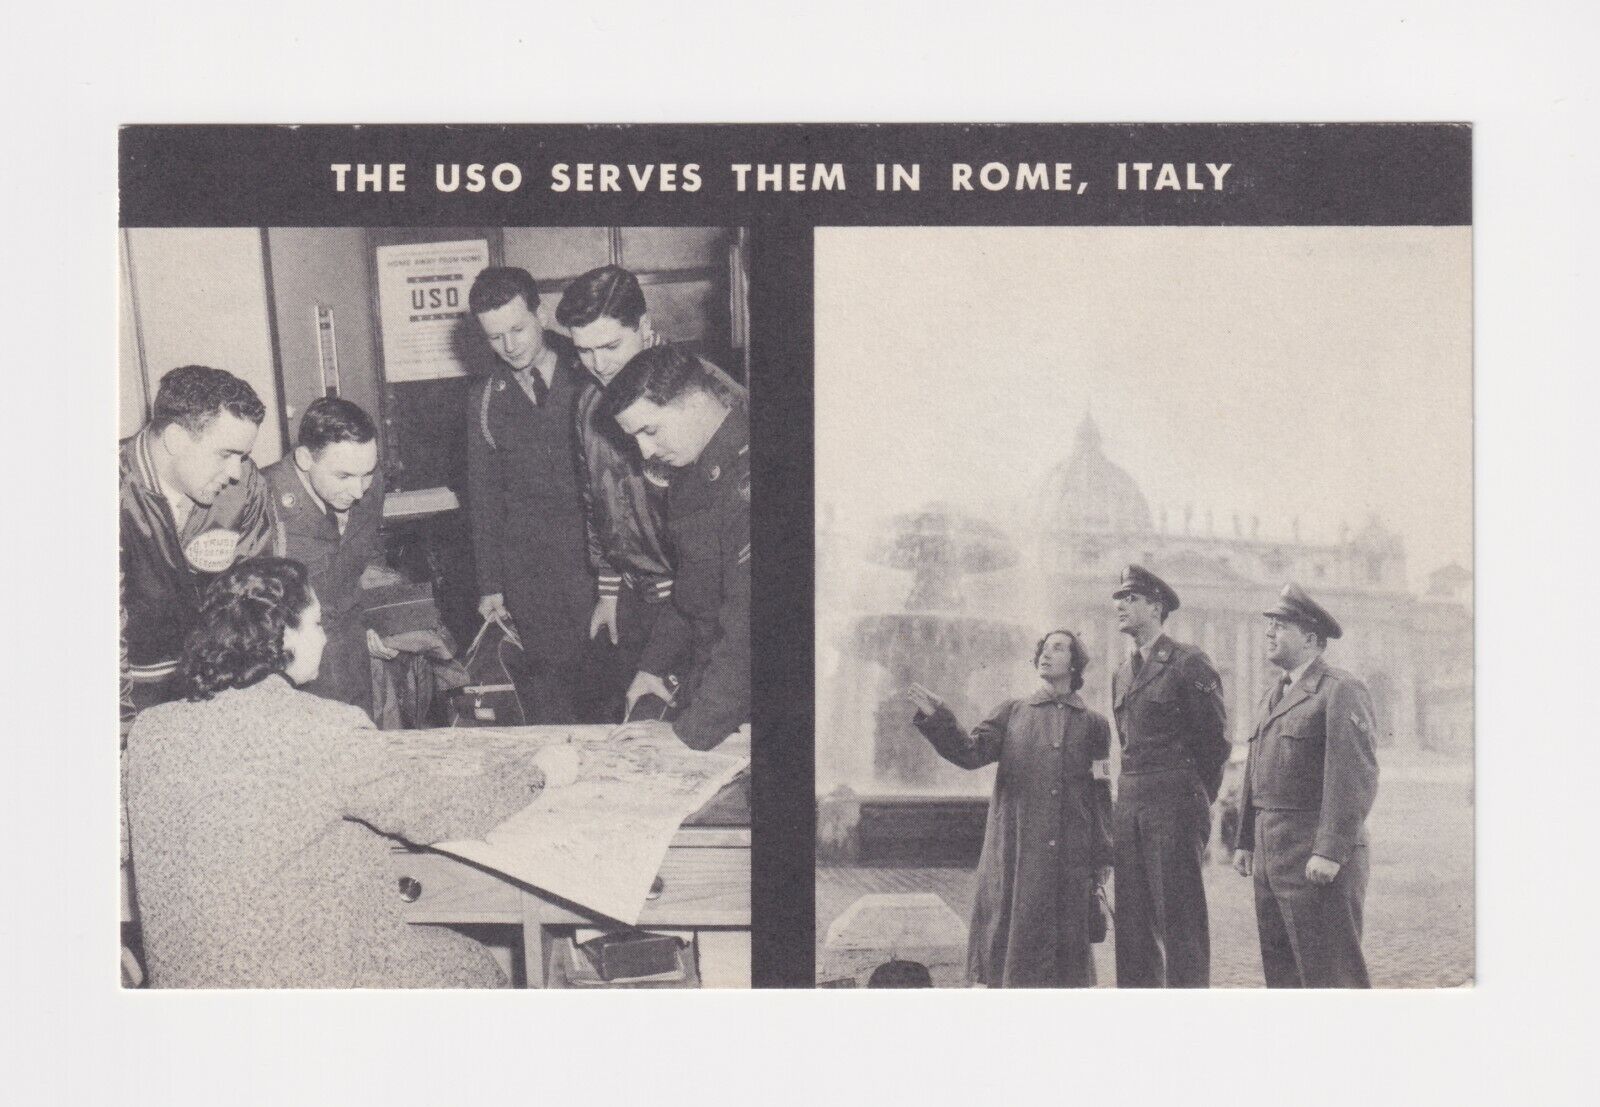 US MILITARY SERVED BY THE USO IN ROME ITALY POST WORLD WAR II CIRCA 1948